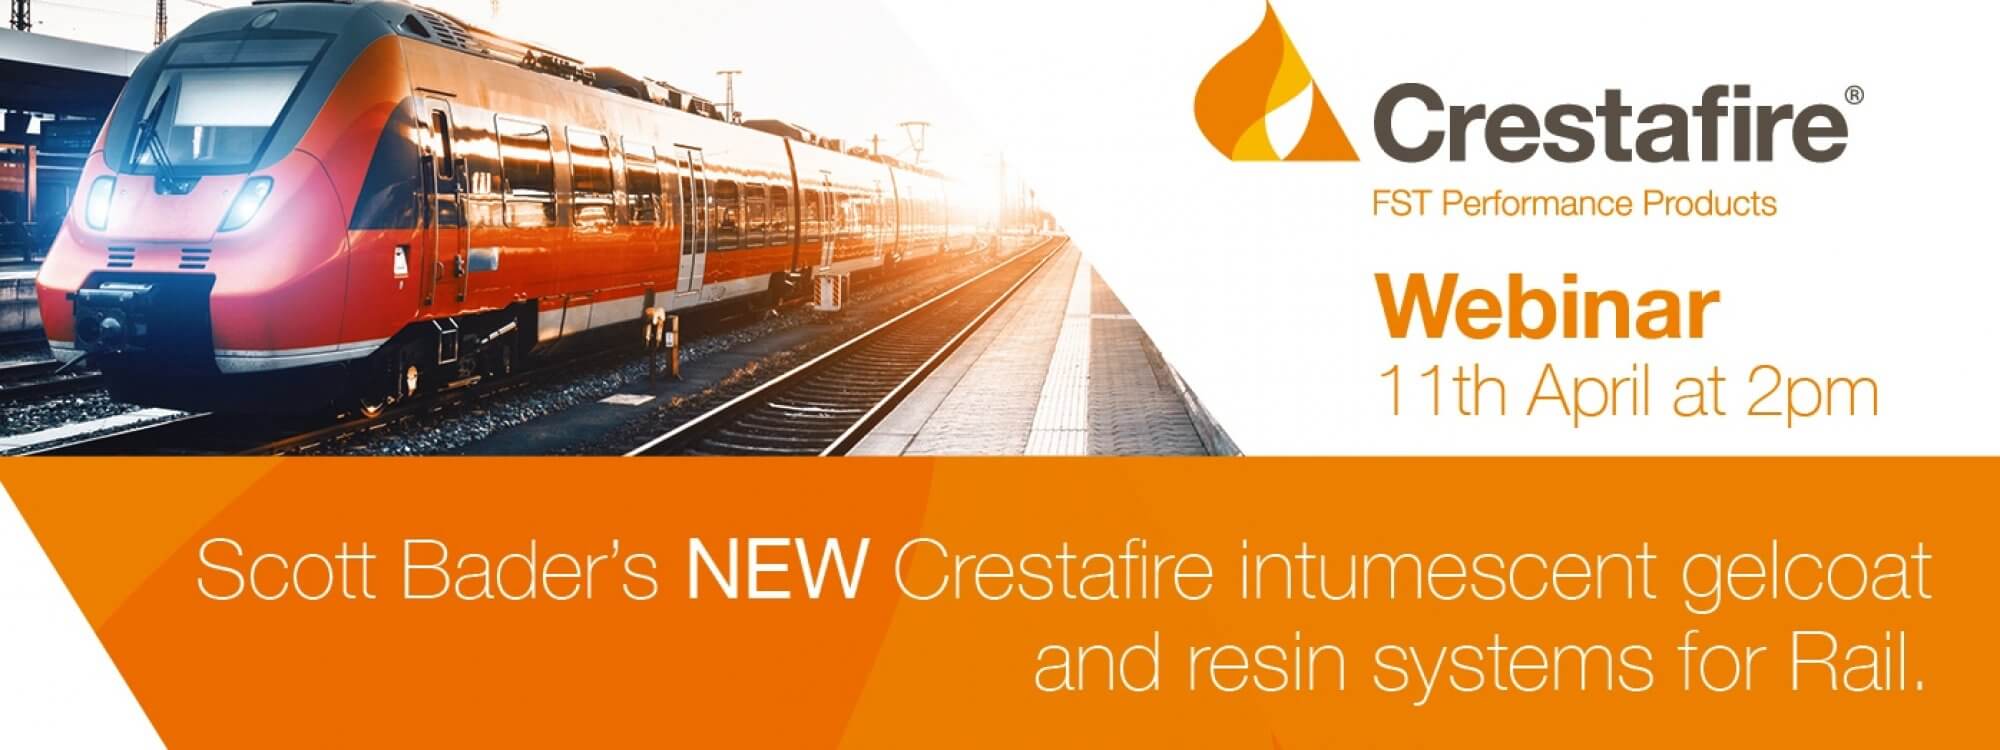 Scott Bader’s webinar on new Crestafire<sup>®</sup> FST intumescent gelcoat and resin systems